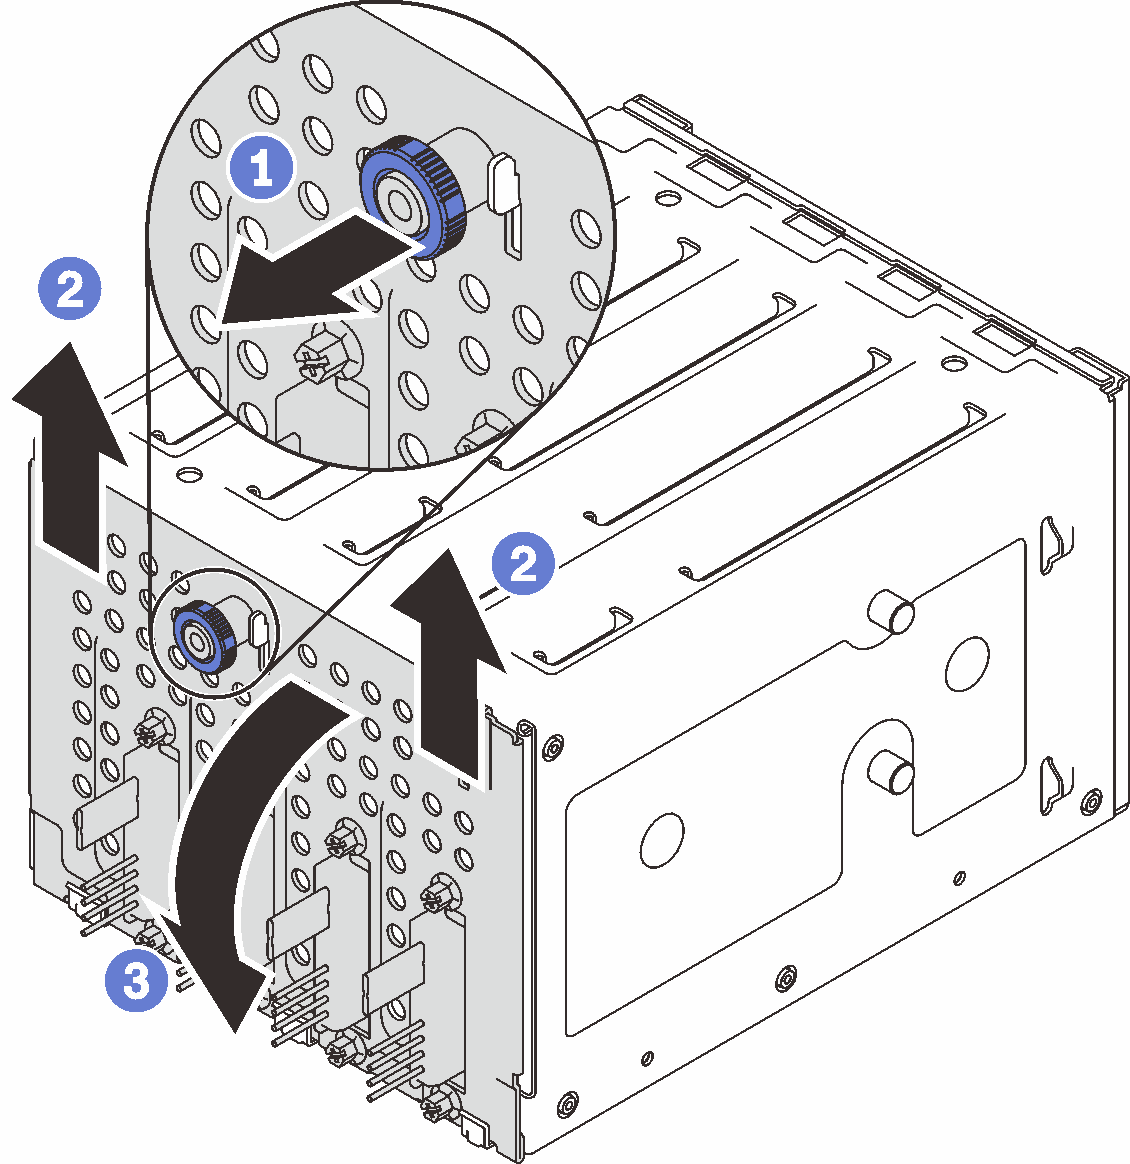 Removing the simple-swap drive backplate